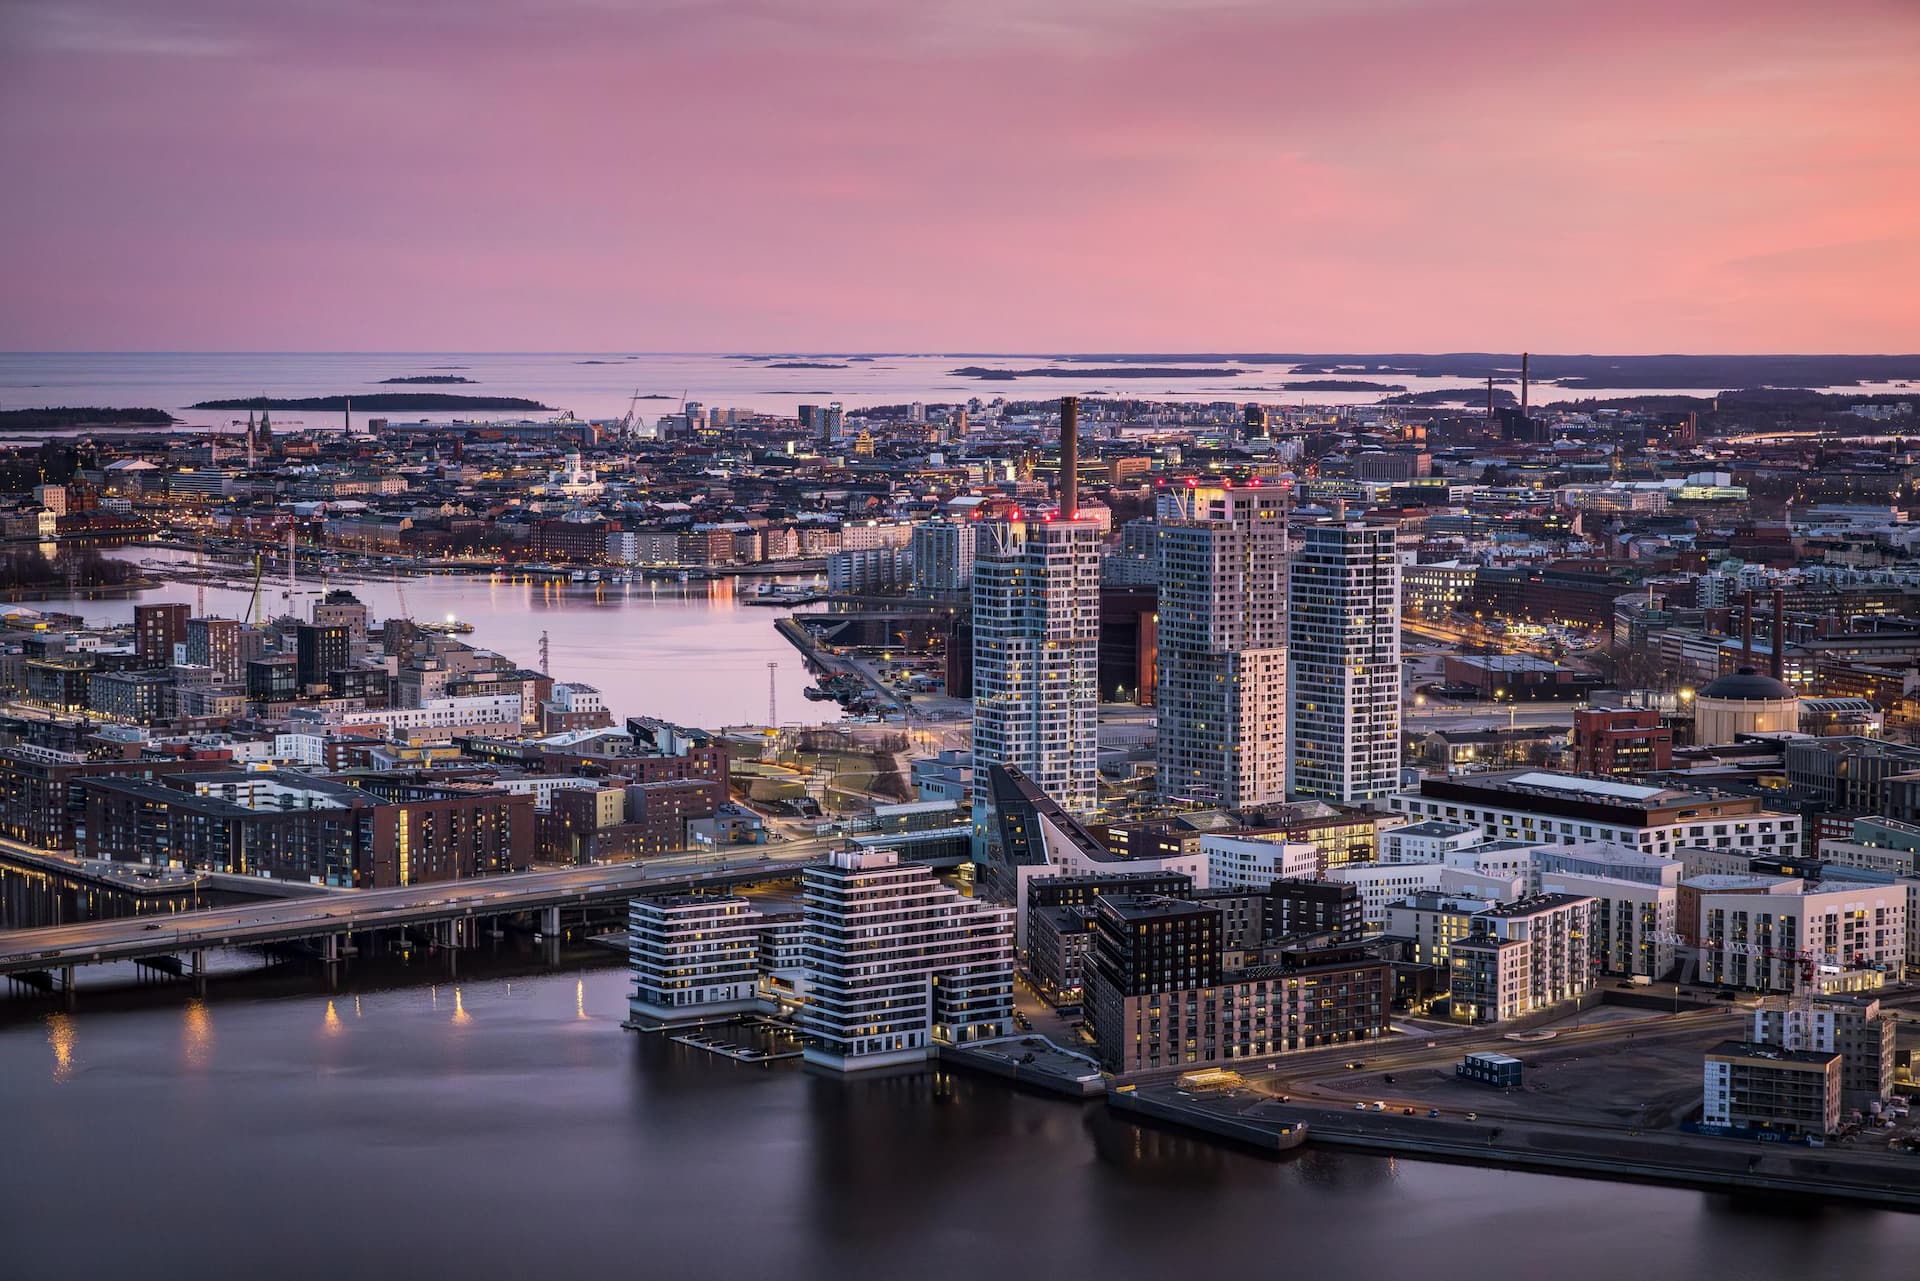 Aerial images (via helicopter) from Helsinki. Image bought from Kuvio.